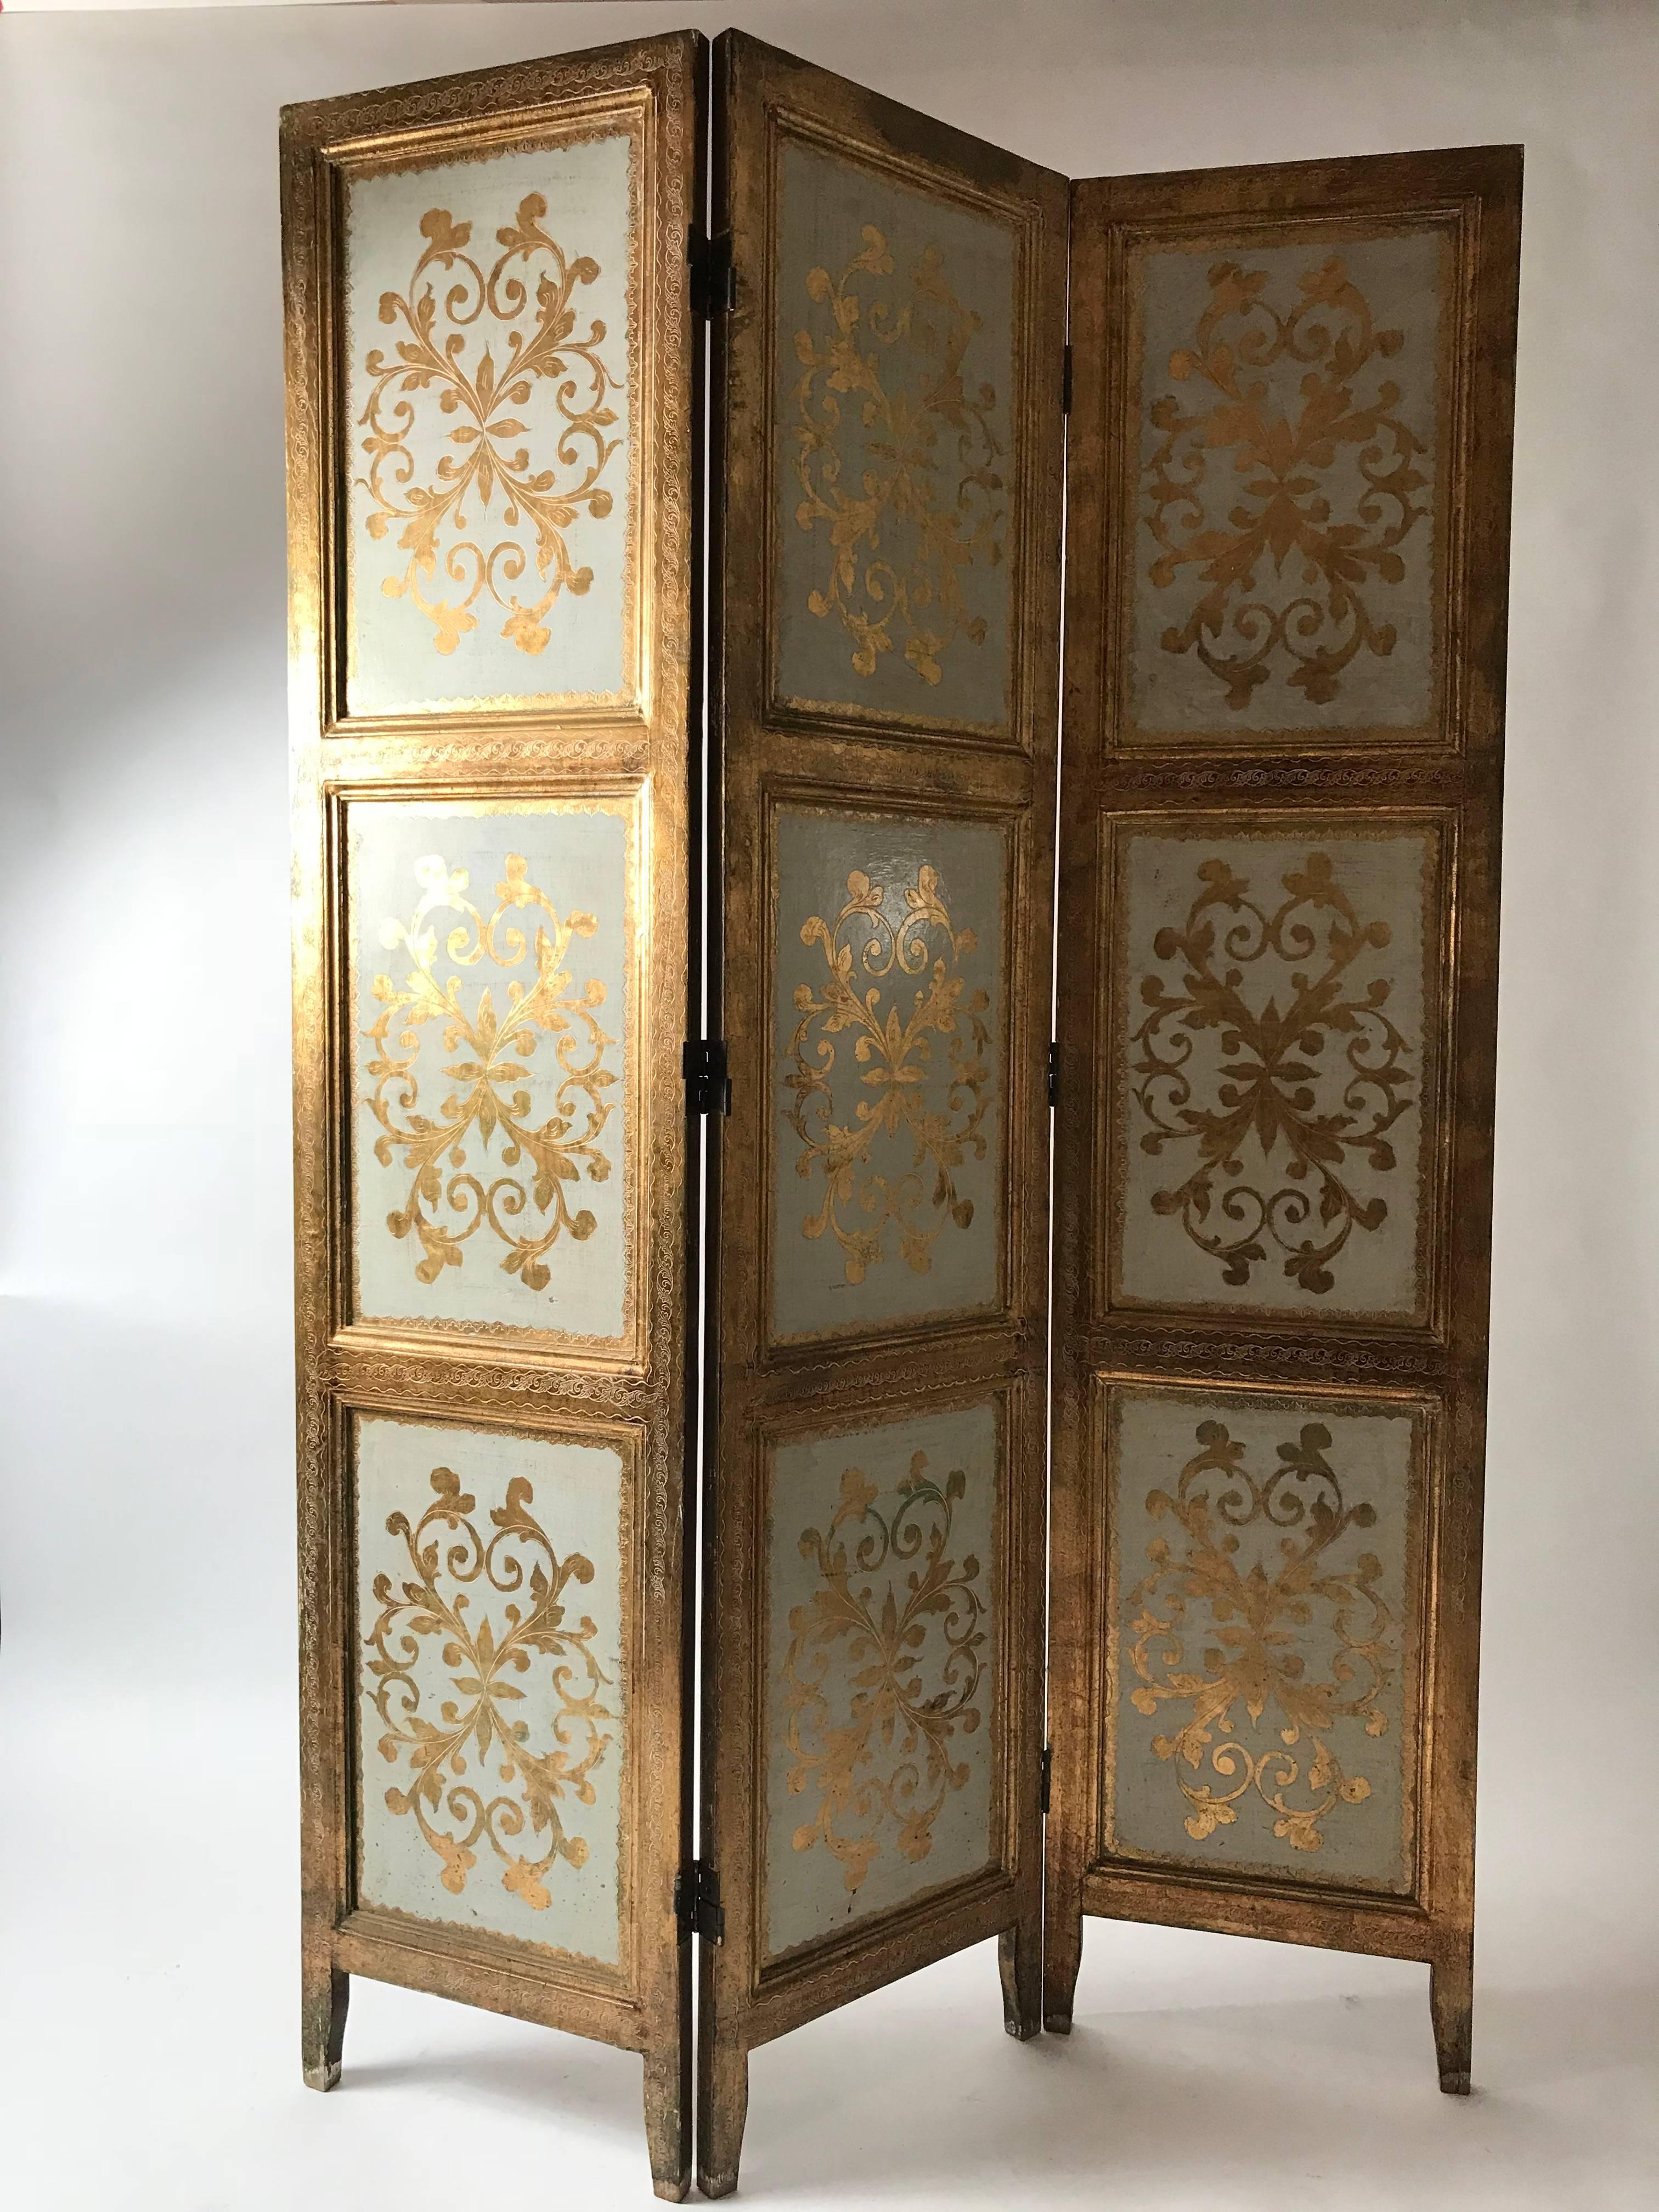 An extraordinarily beautiful giltwood Italian folding screen in the Florentine gilt style. Three panels with double hinges. Fantastic condition for a Florentine item. All panels have an intact design but show perfect patina. A special piece.